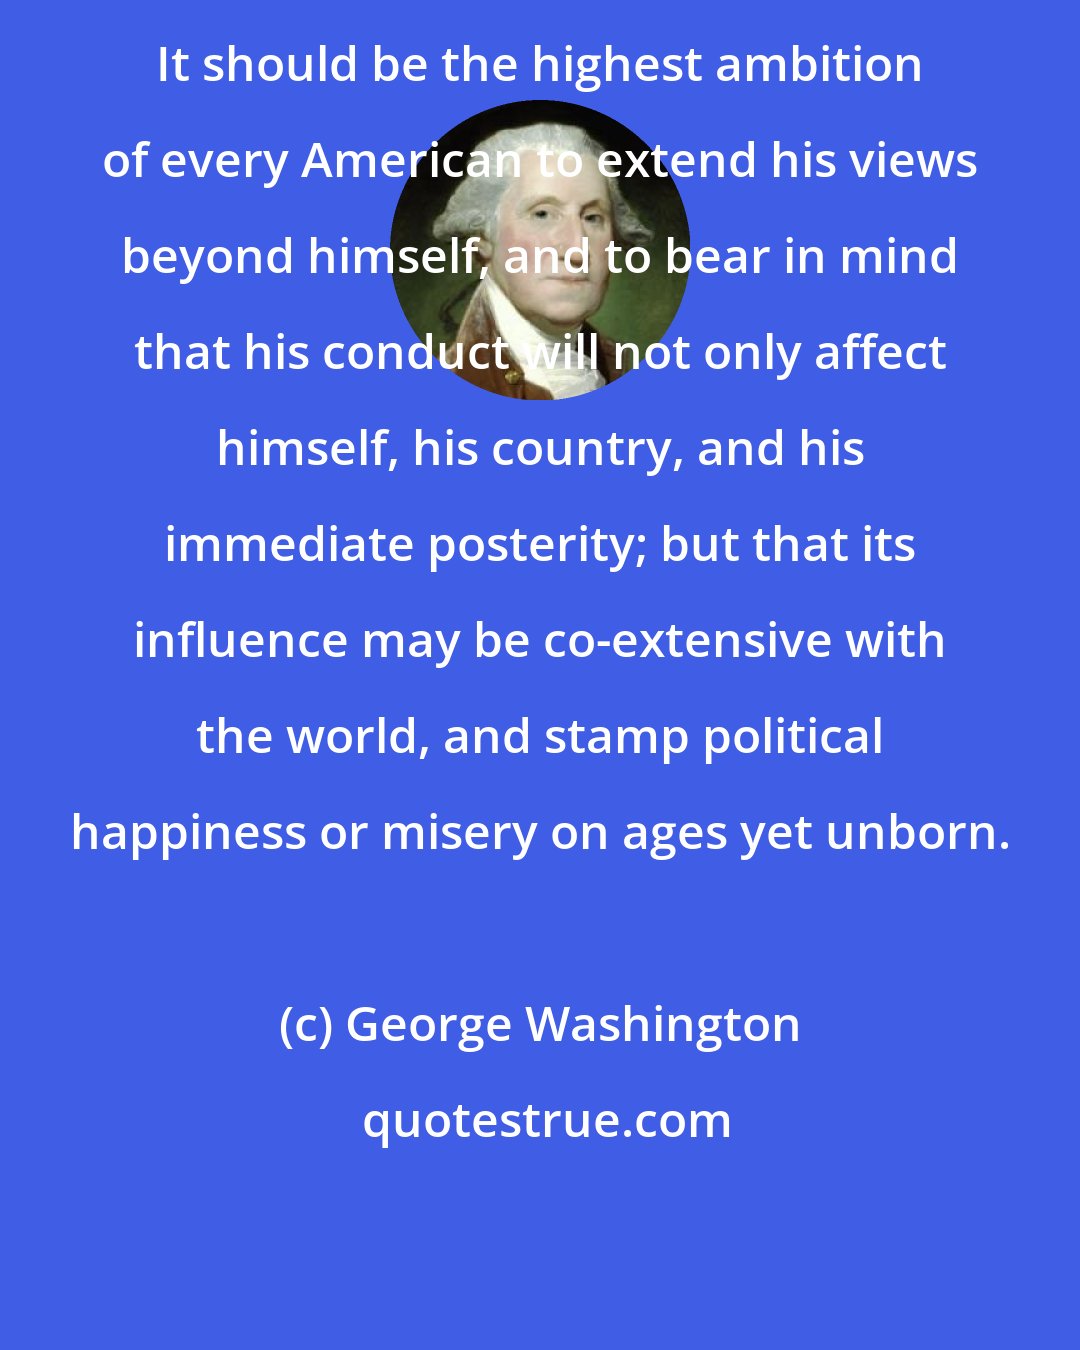 George Washington: It should be the highest ambition of every American to extend his views beyond himself, and to bear in mind that his conduct will not only affect himself, his country, and his immediate posterity; but that its influence may be co-extensive with the world, and stamp political happiness or misery on ages yet unborn.